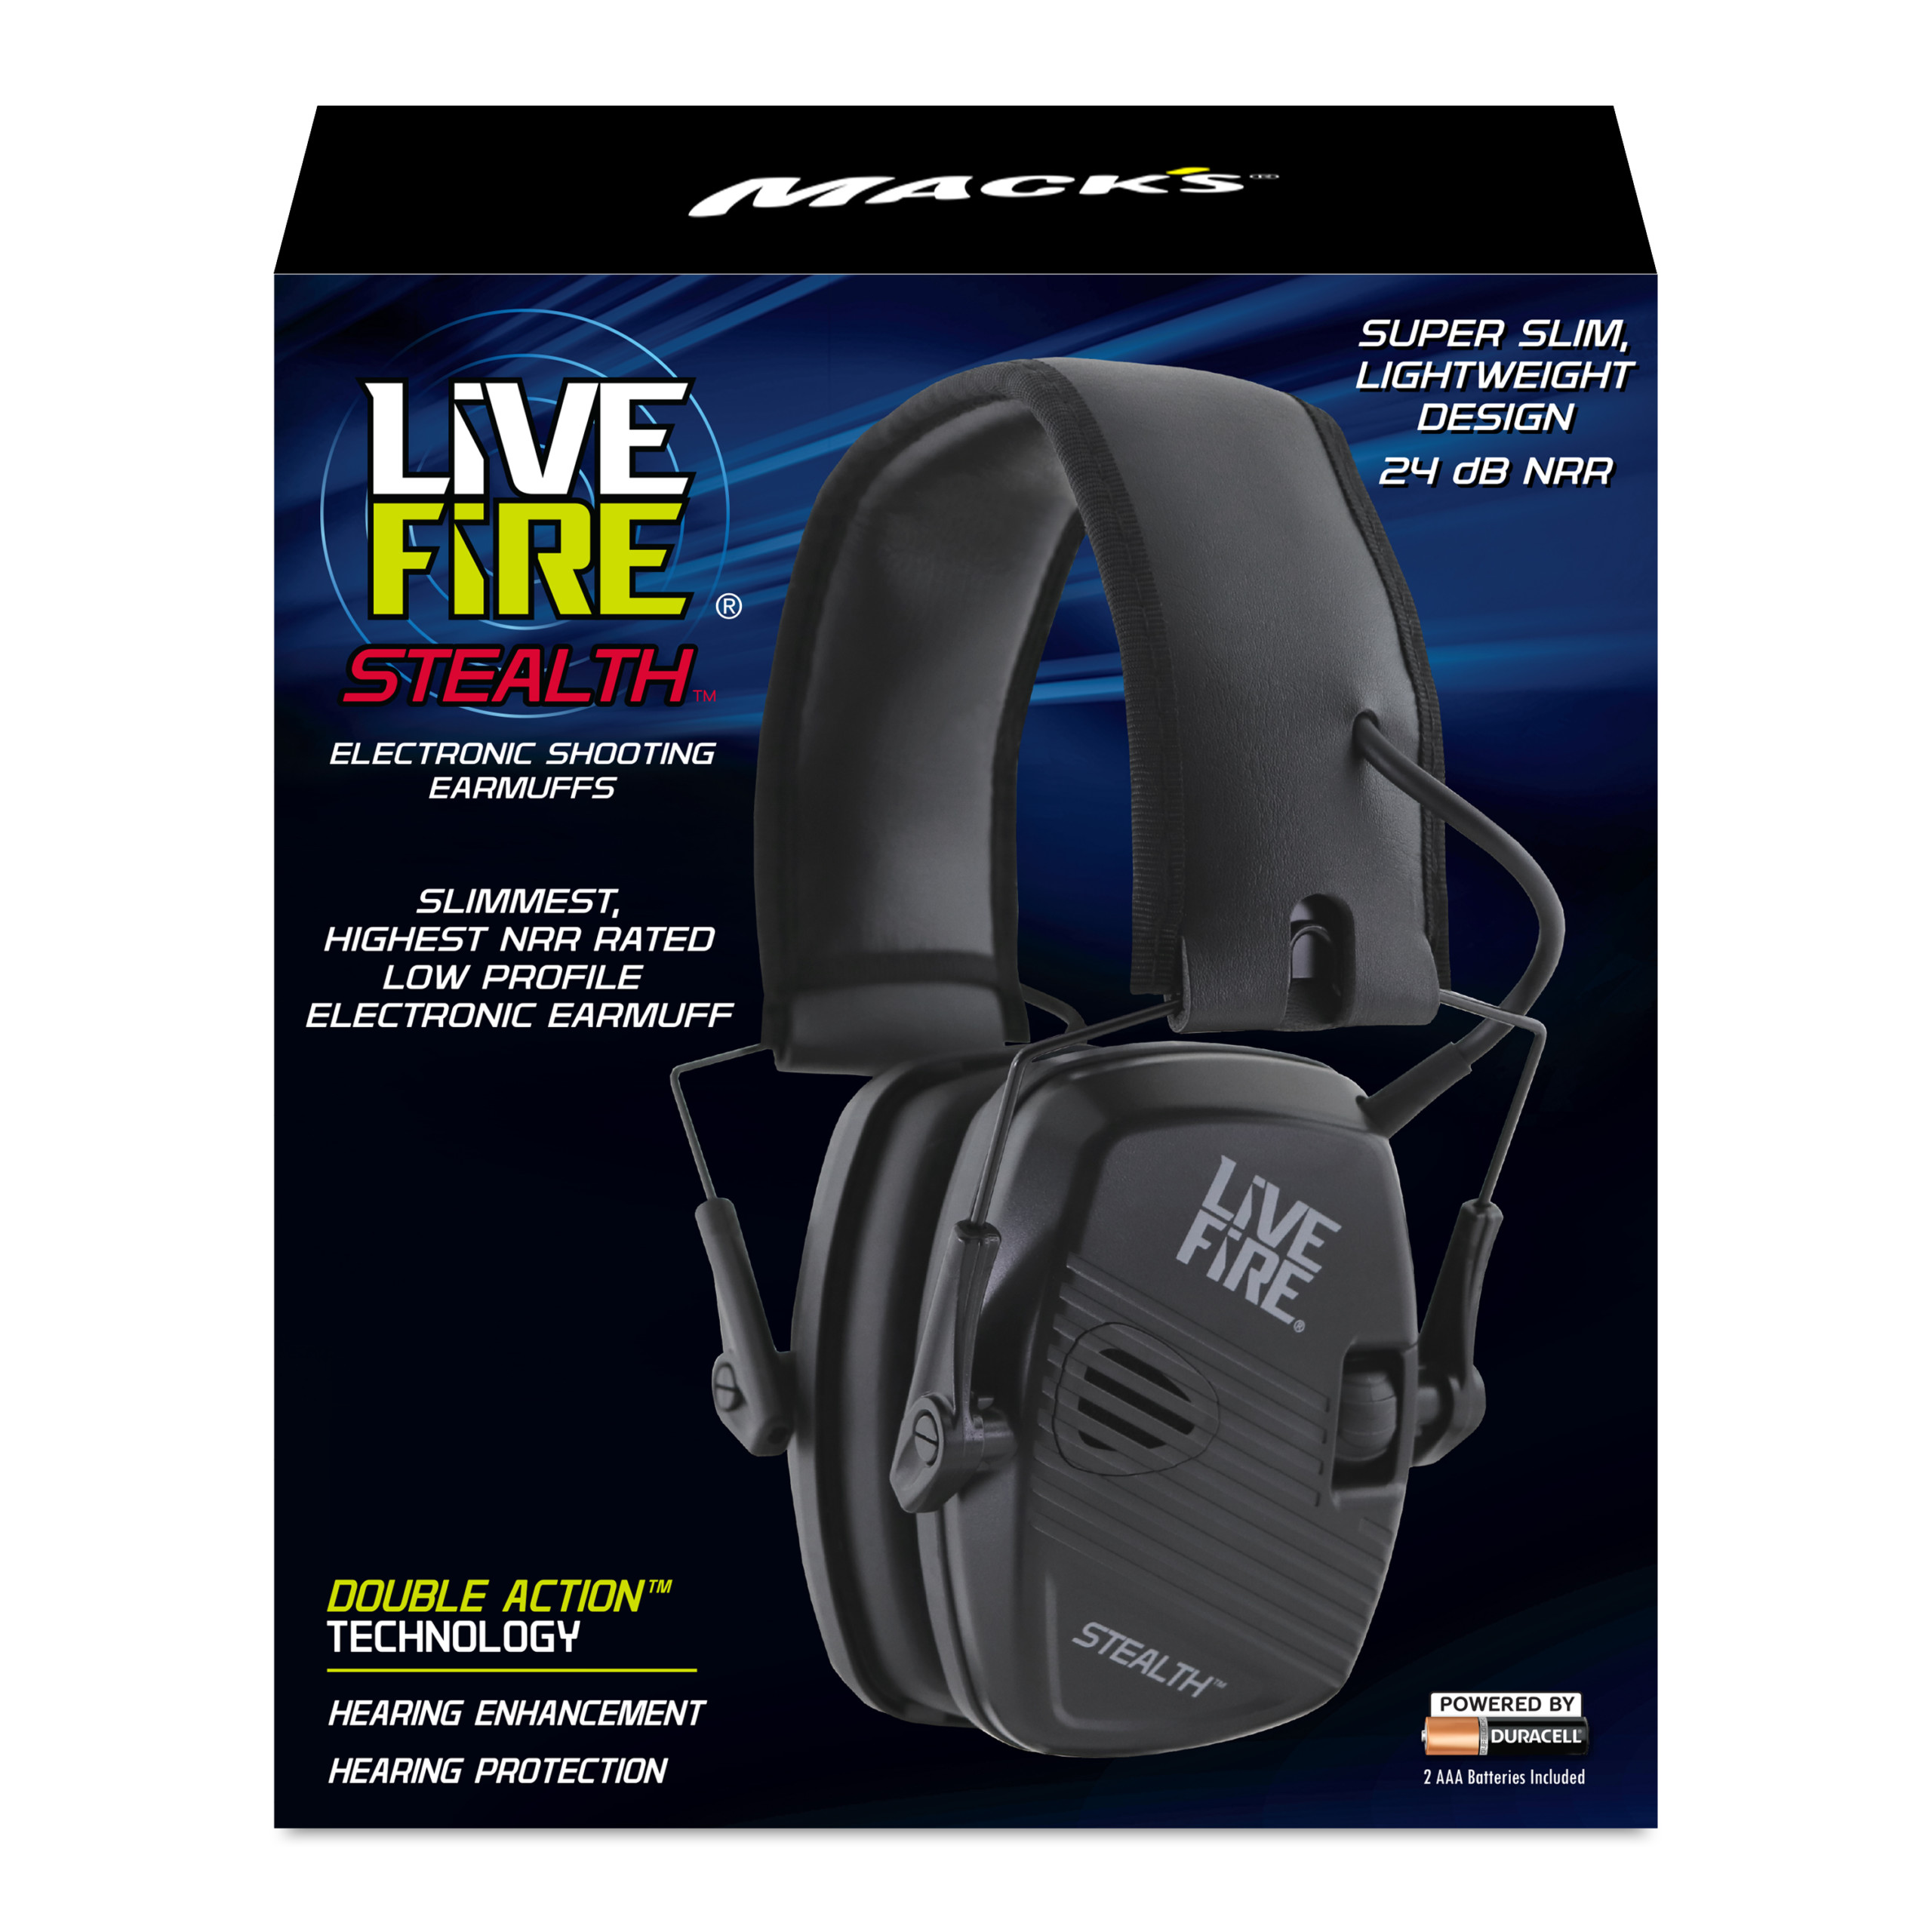 Best Electronic Shooting Earmuffs - Live Fire Stealth from Mack's®